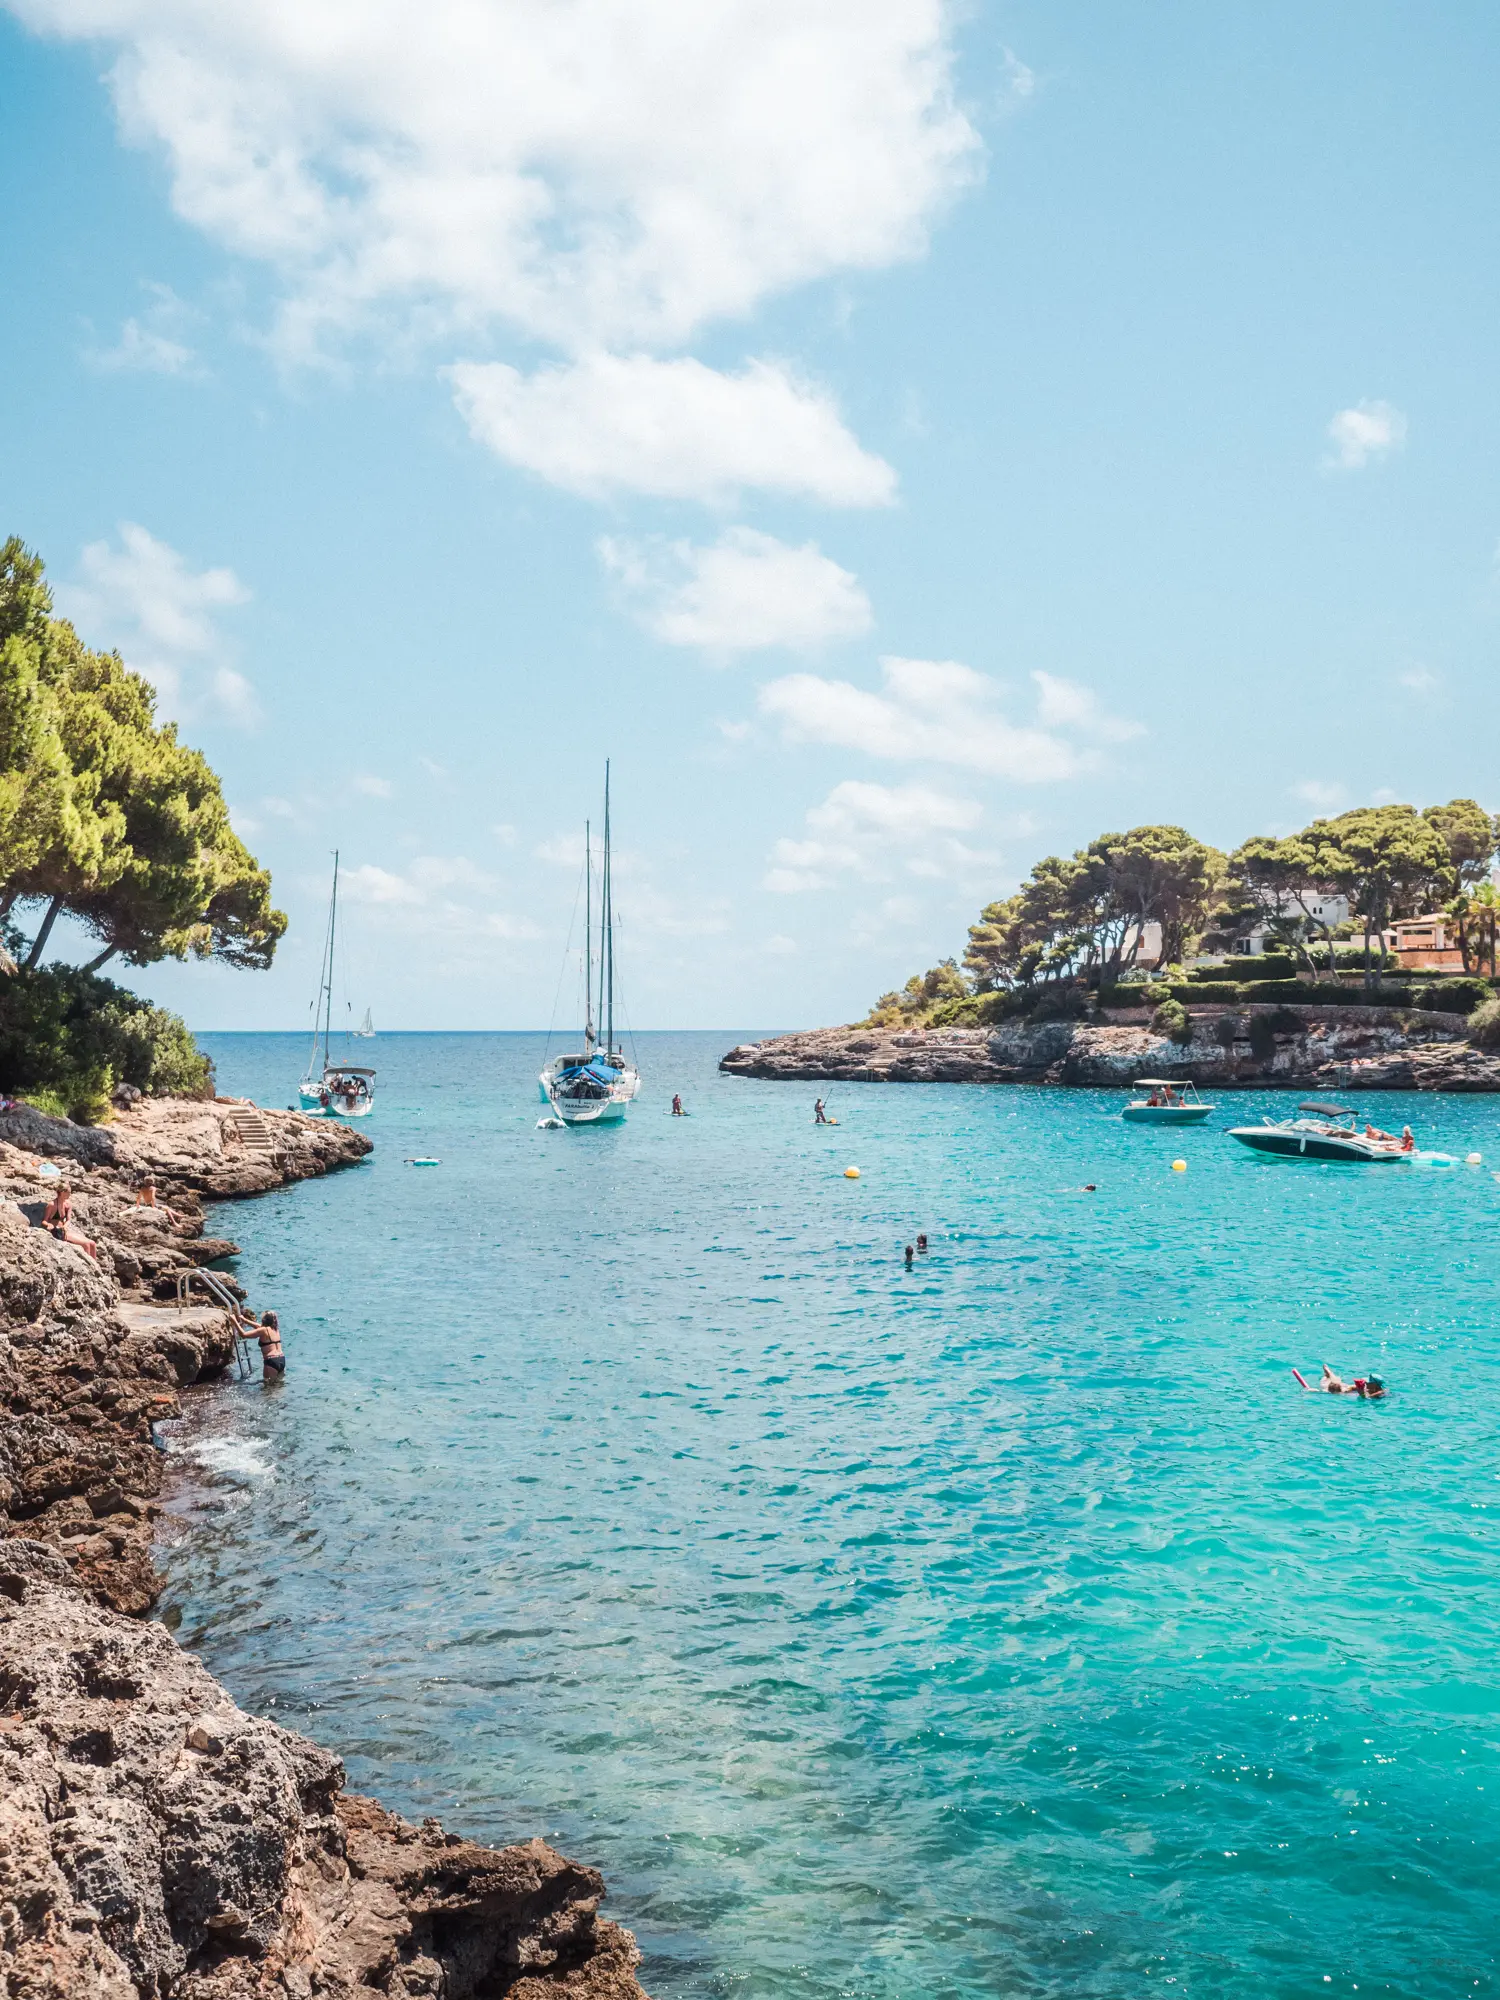 Two sailboats and two smaller boats with people swimming around in the turquoise ocean of Cala Gran with rocks on each side, one of the best beaches in Mallorca.